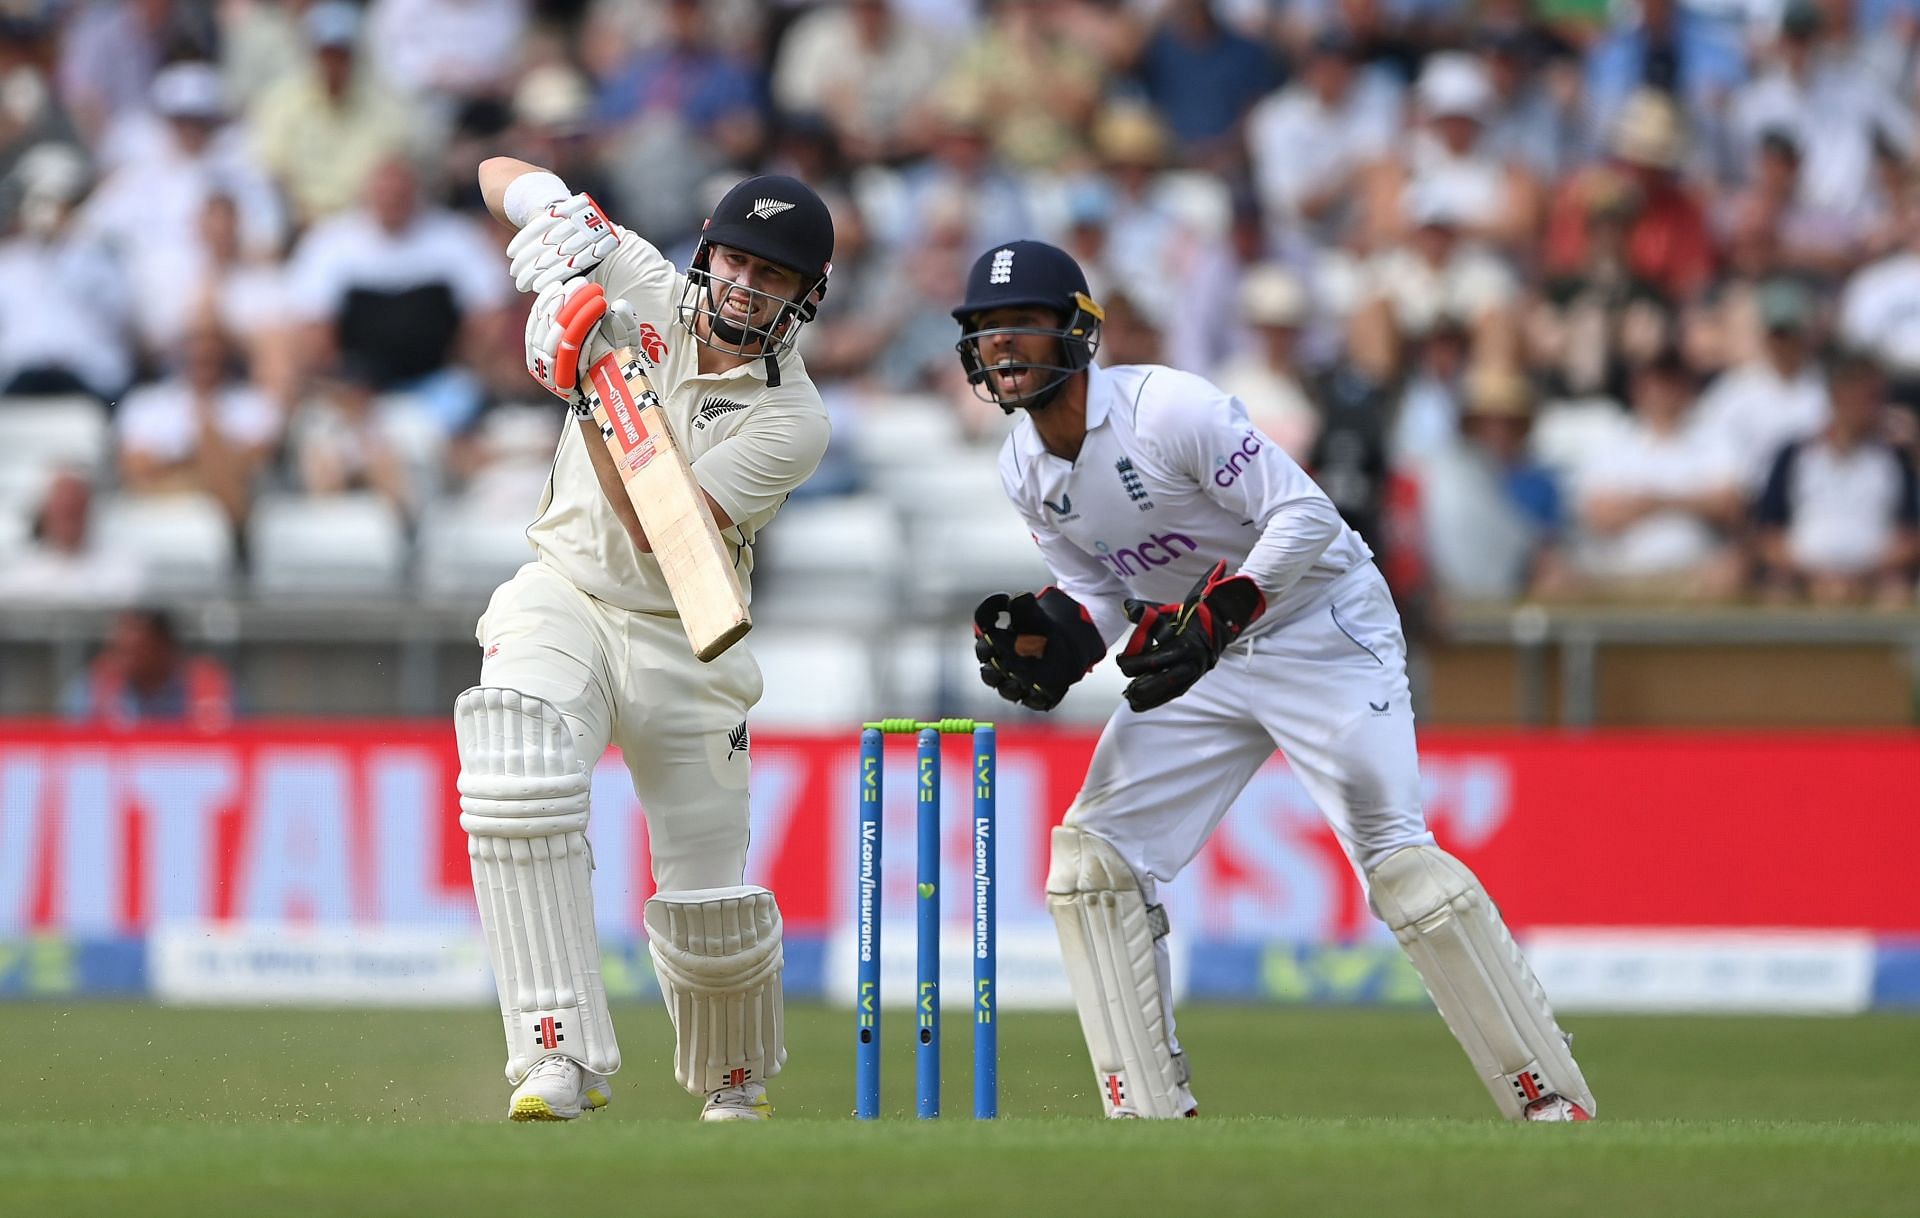 Henry Nicholls drives as Ben Foakes looks on. (Image Credits: Twitter)